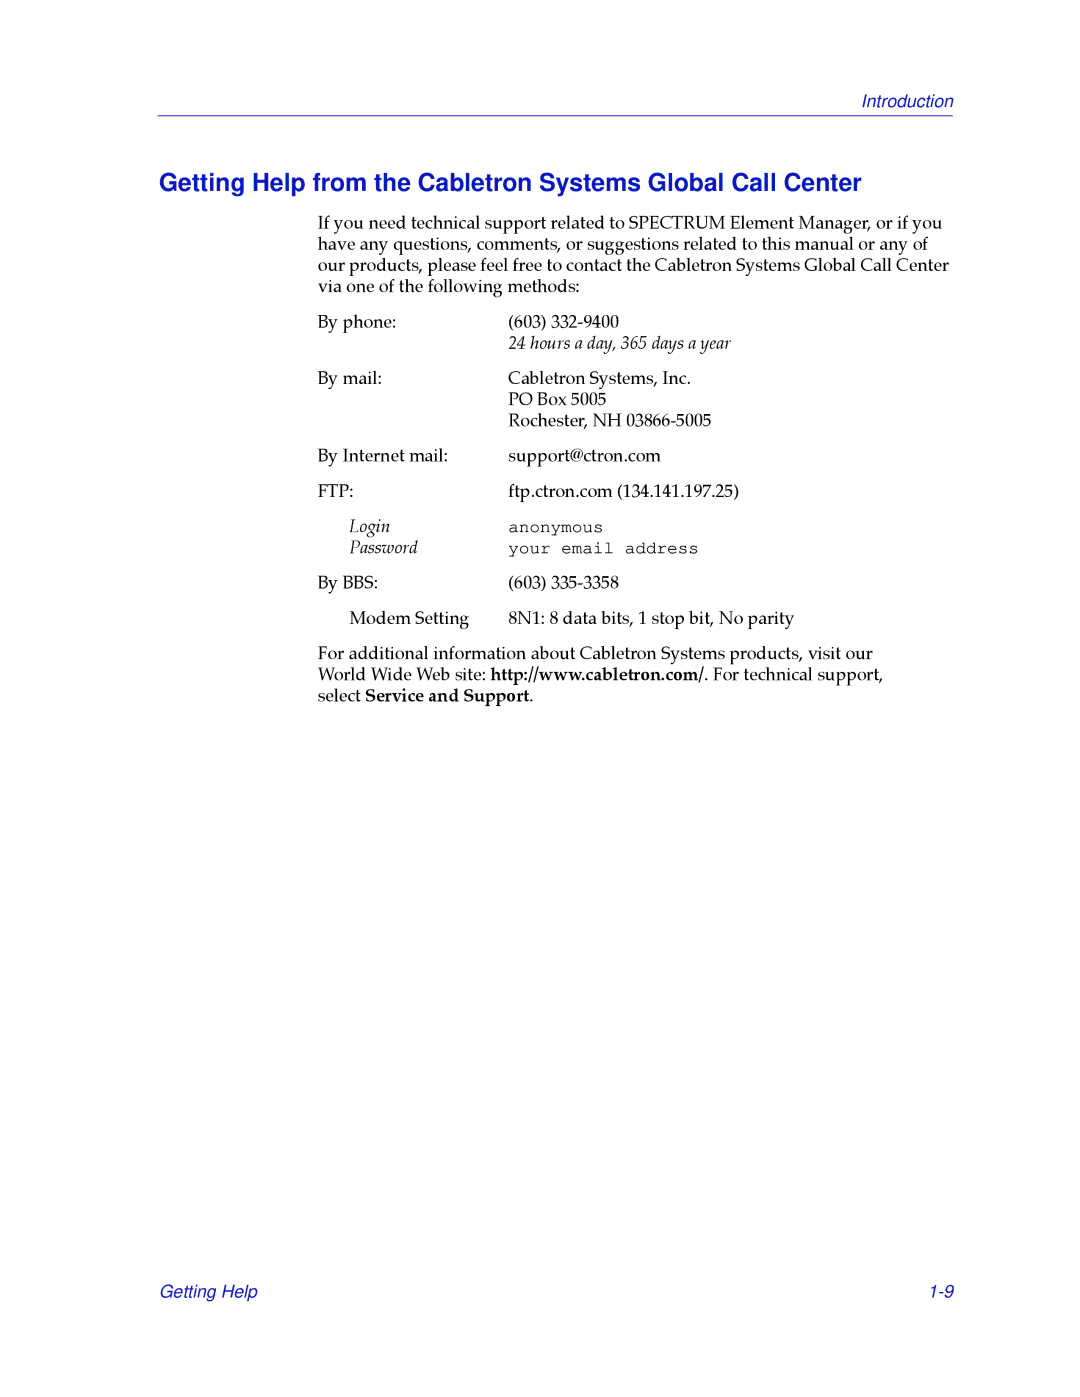 Cabletron Systems 2.2 manual Getting Help from the Cabletron Systems Global Call Center, Hours a day, 365 days a year 